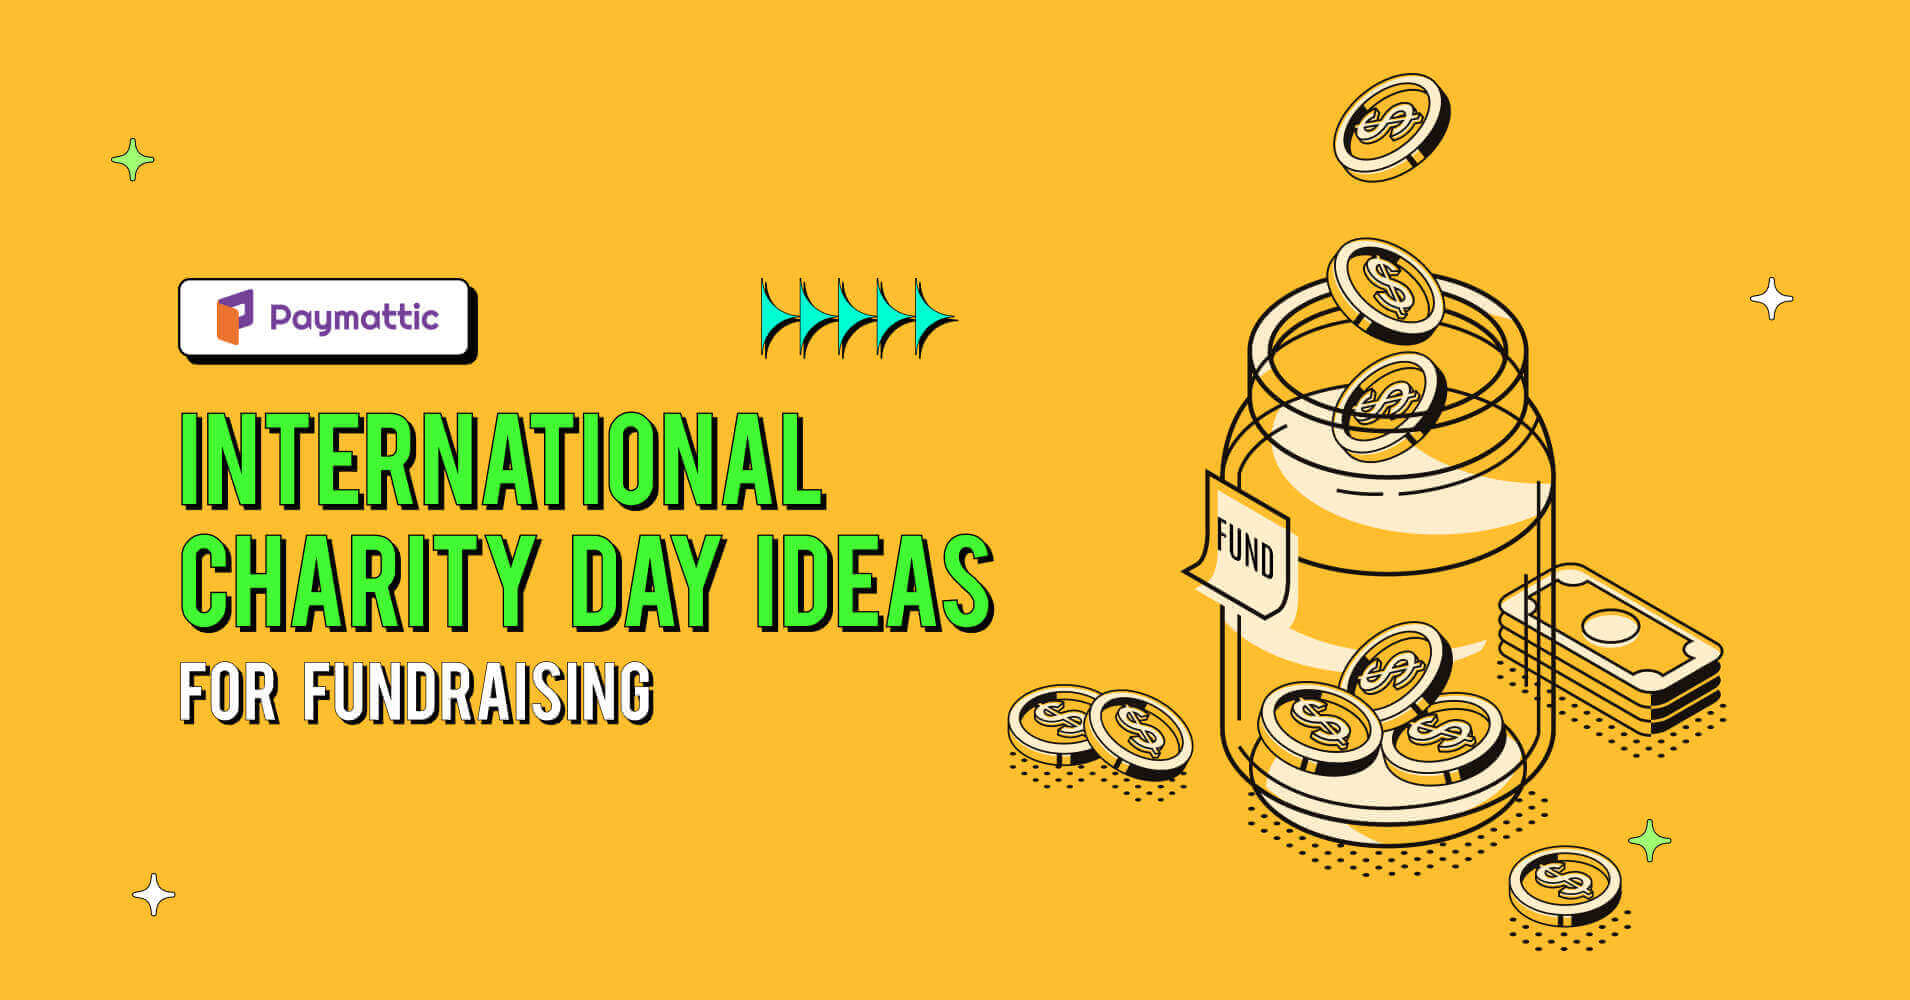 International Charity Day Ideas for Fundraising